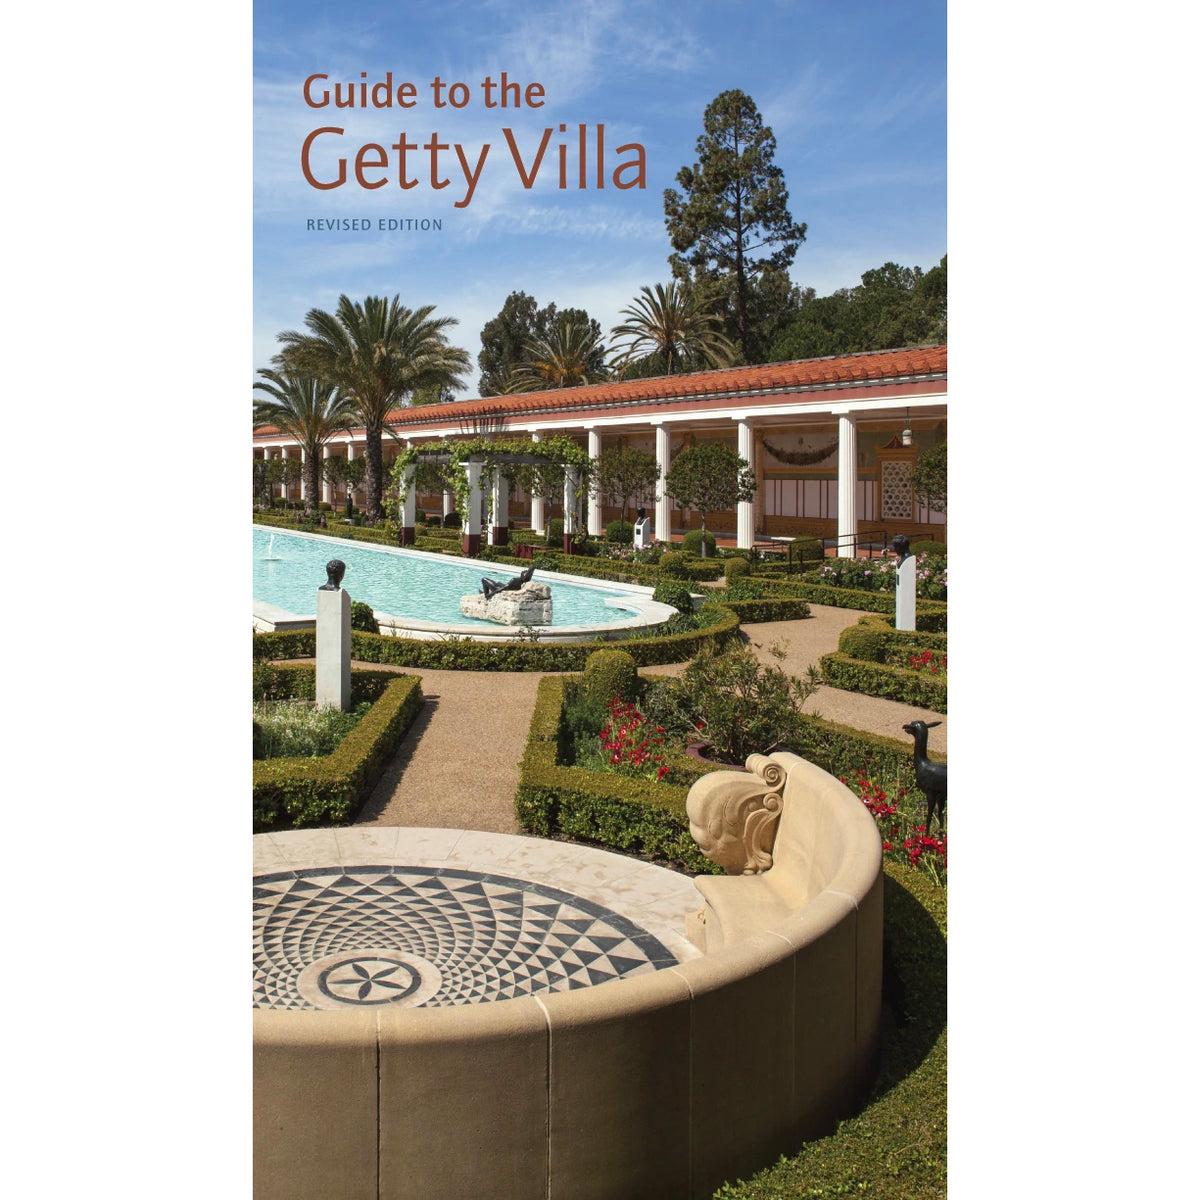 Guide to the Getty Villa: Revised Edition